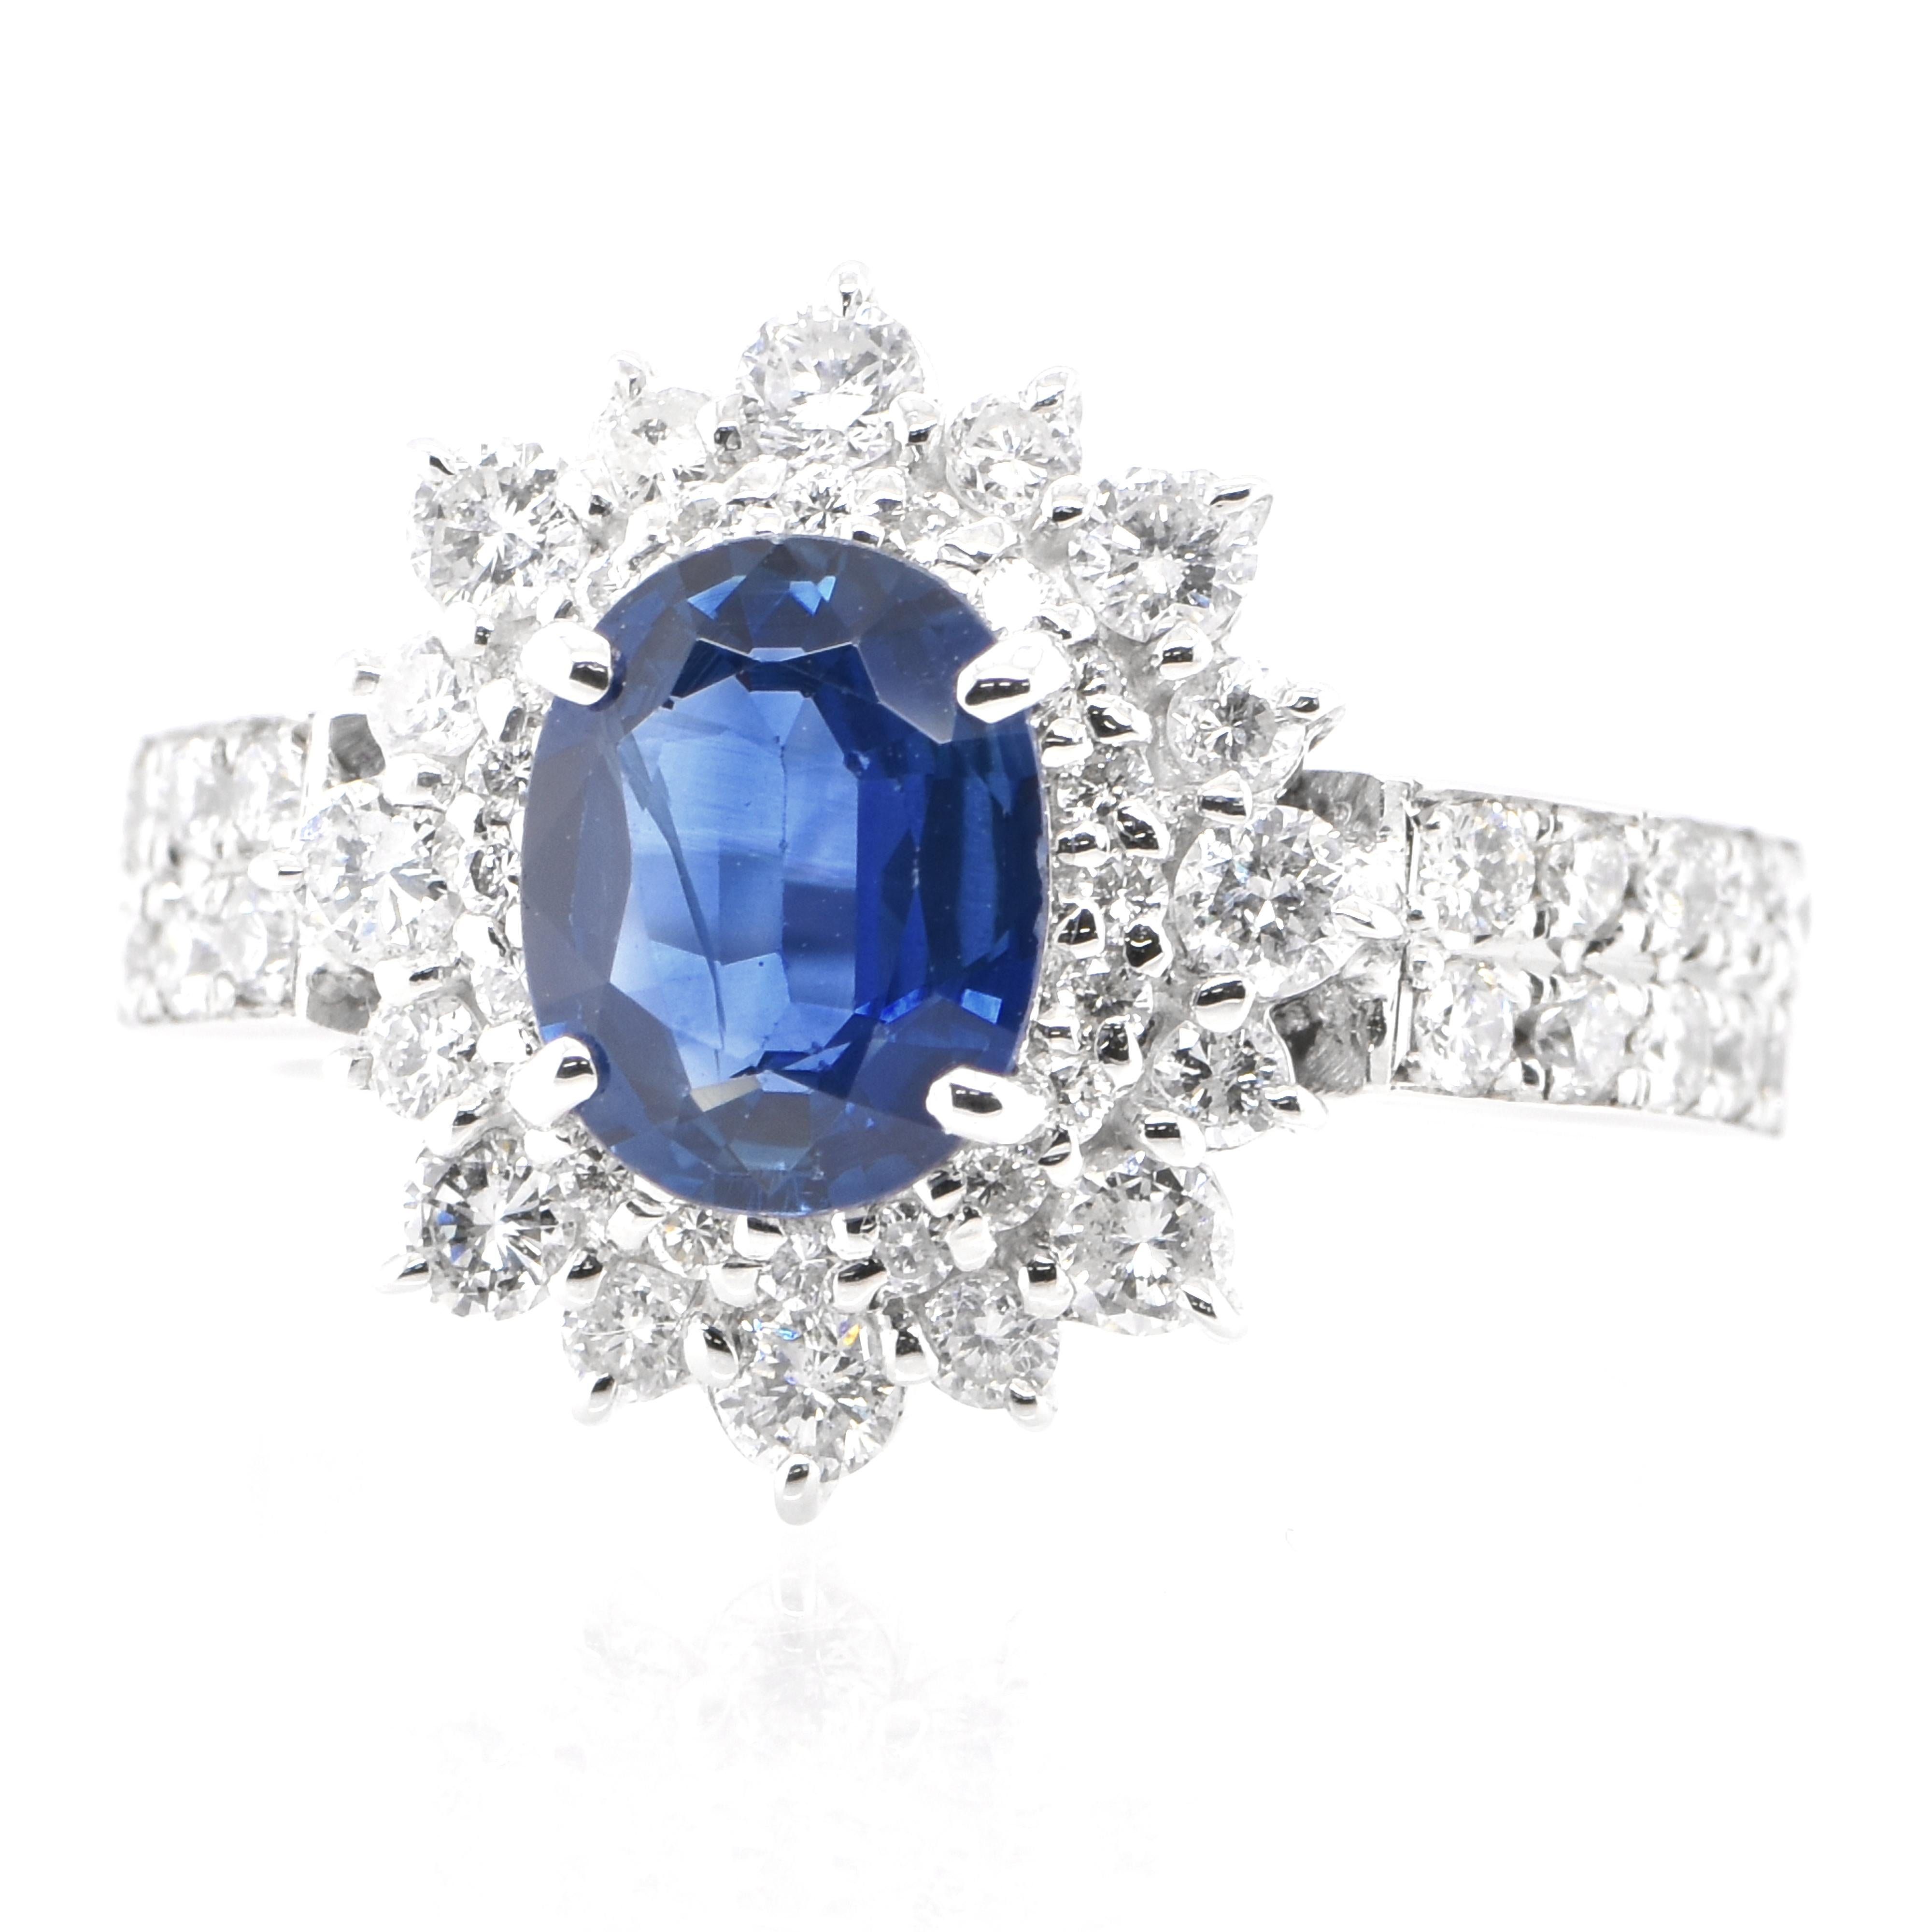 A beautiful ring featuring 1.03 Carat, Natural Sapphire and Diamond Accents set in Platinum. Sapphires have extraordinary durability - they excel in hardness as well as toughness and durability making them very popular in jewelry. Traditionally, the